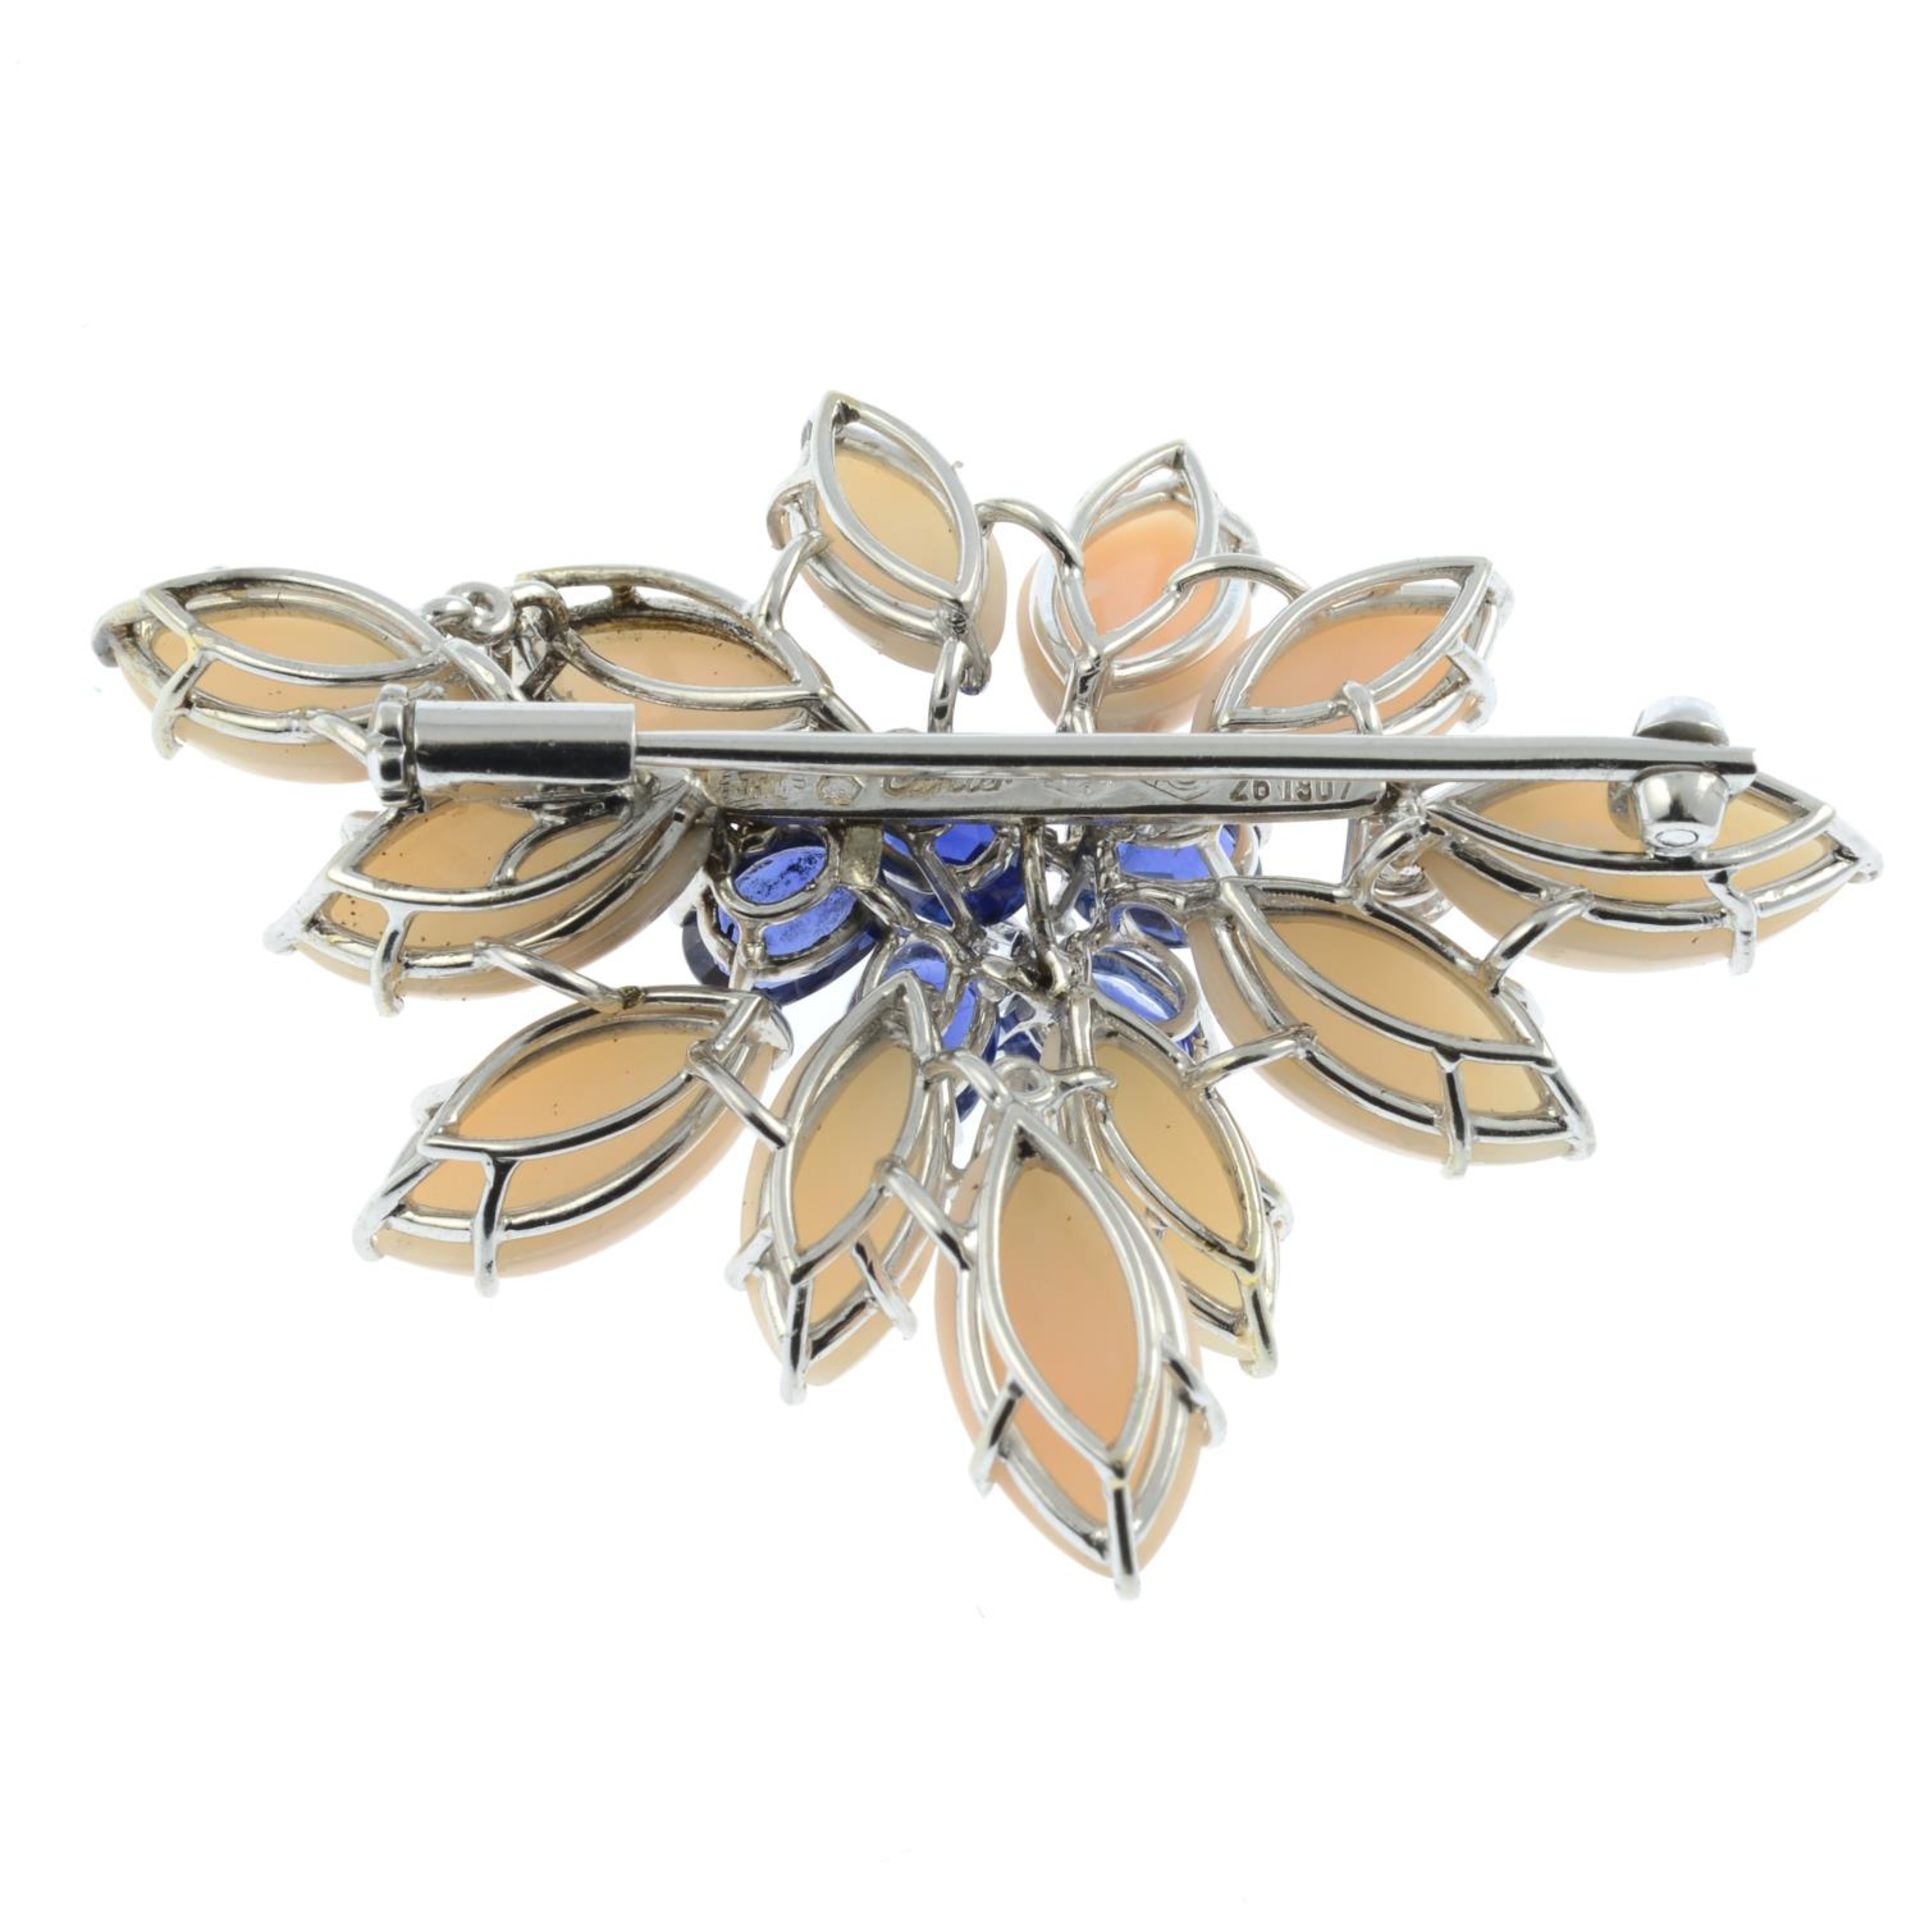 An 18ct gold Burmese sapphire, coral and diamond brooch, by Cartier. - Image 4 of 4